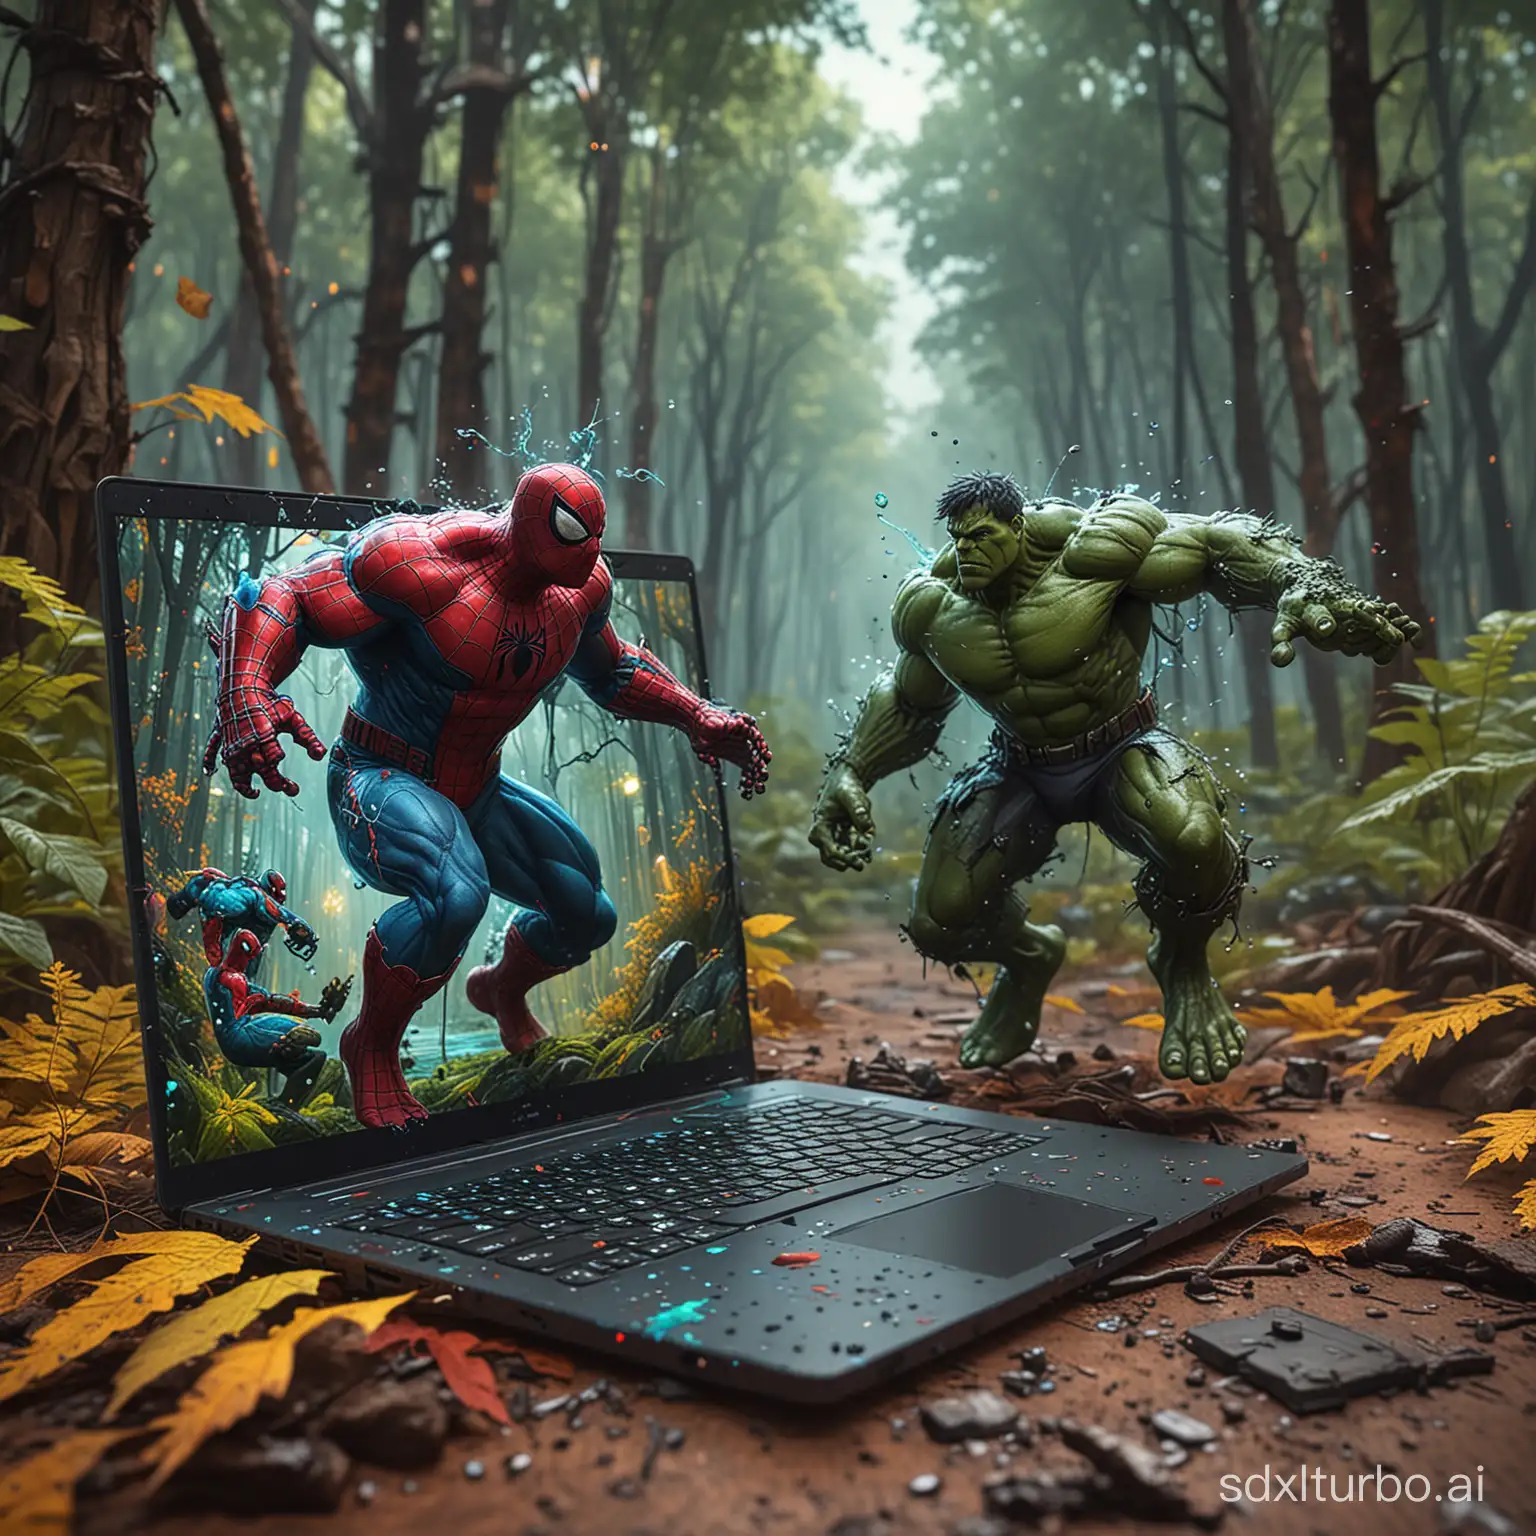 Steampunk-Hulk-and-Spiderman-Bursting-from-Laptop-in-Vibrant-Forest-3D-Hologram-Art